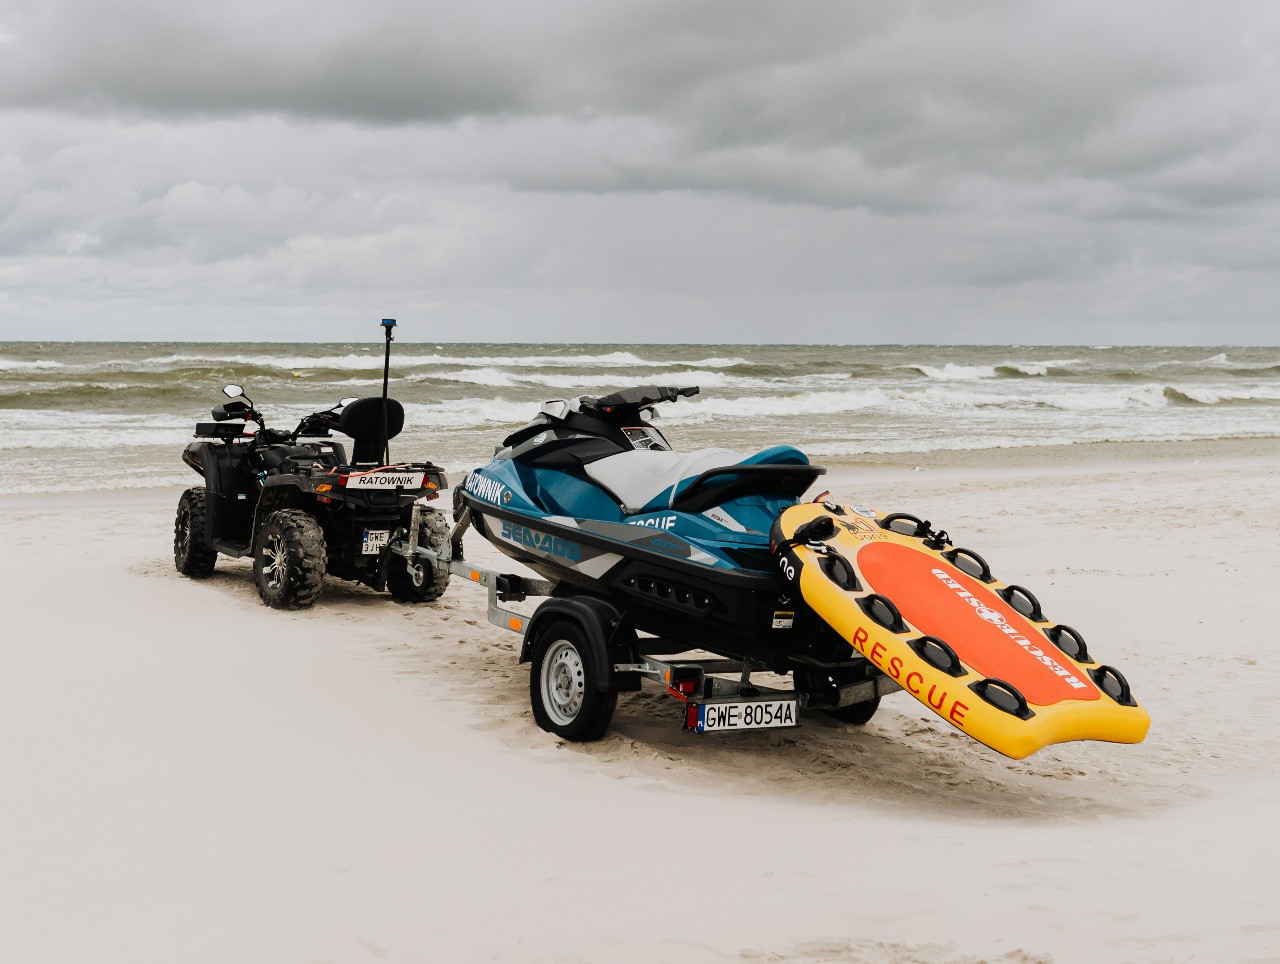 Tips on Securing Your Jet Ski to Your Trailer